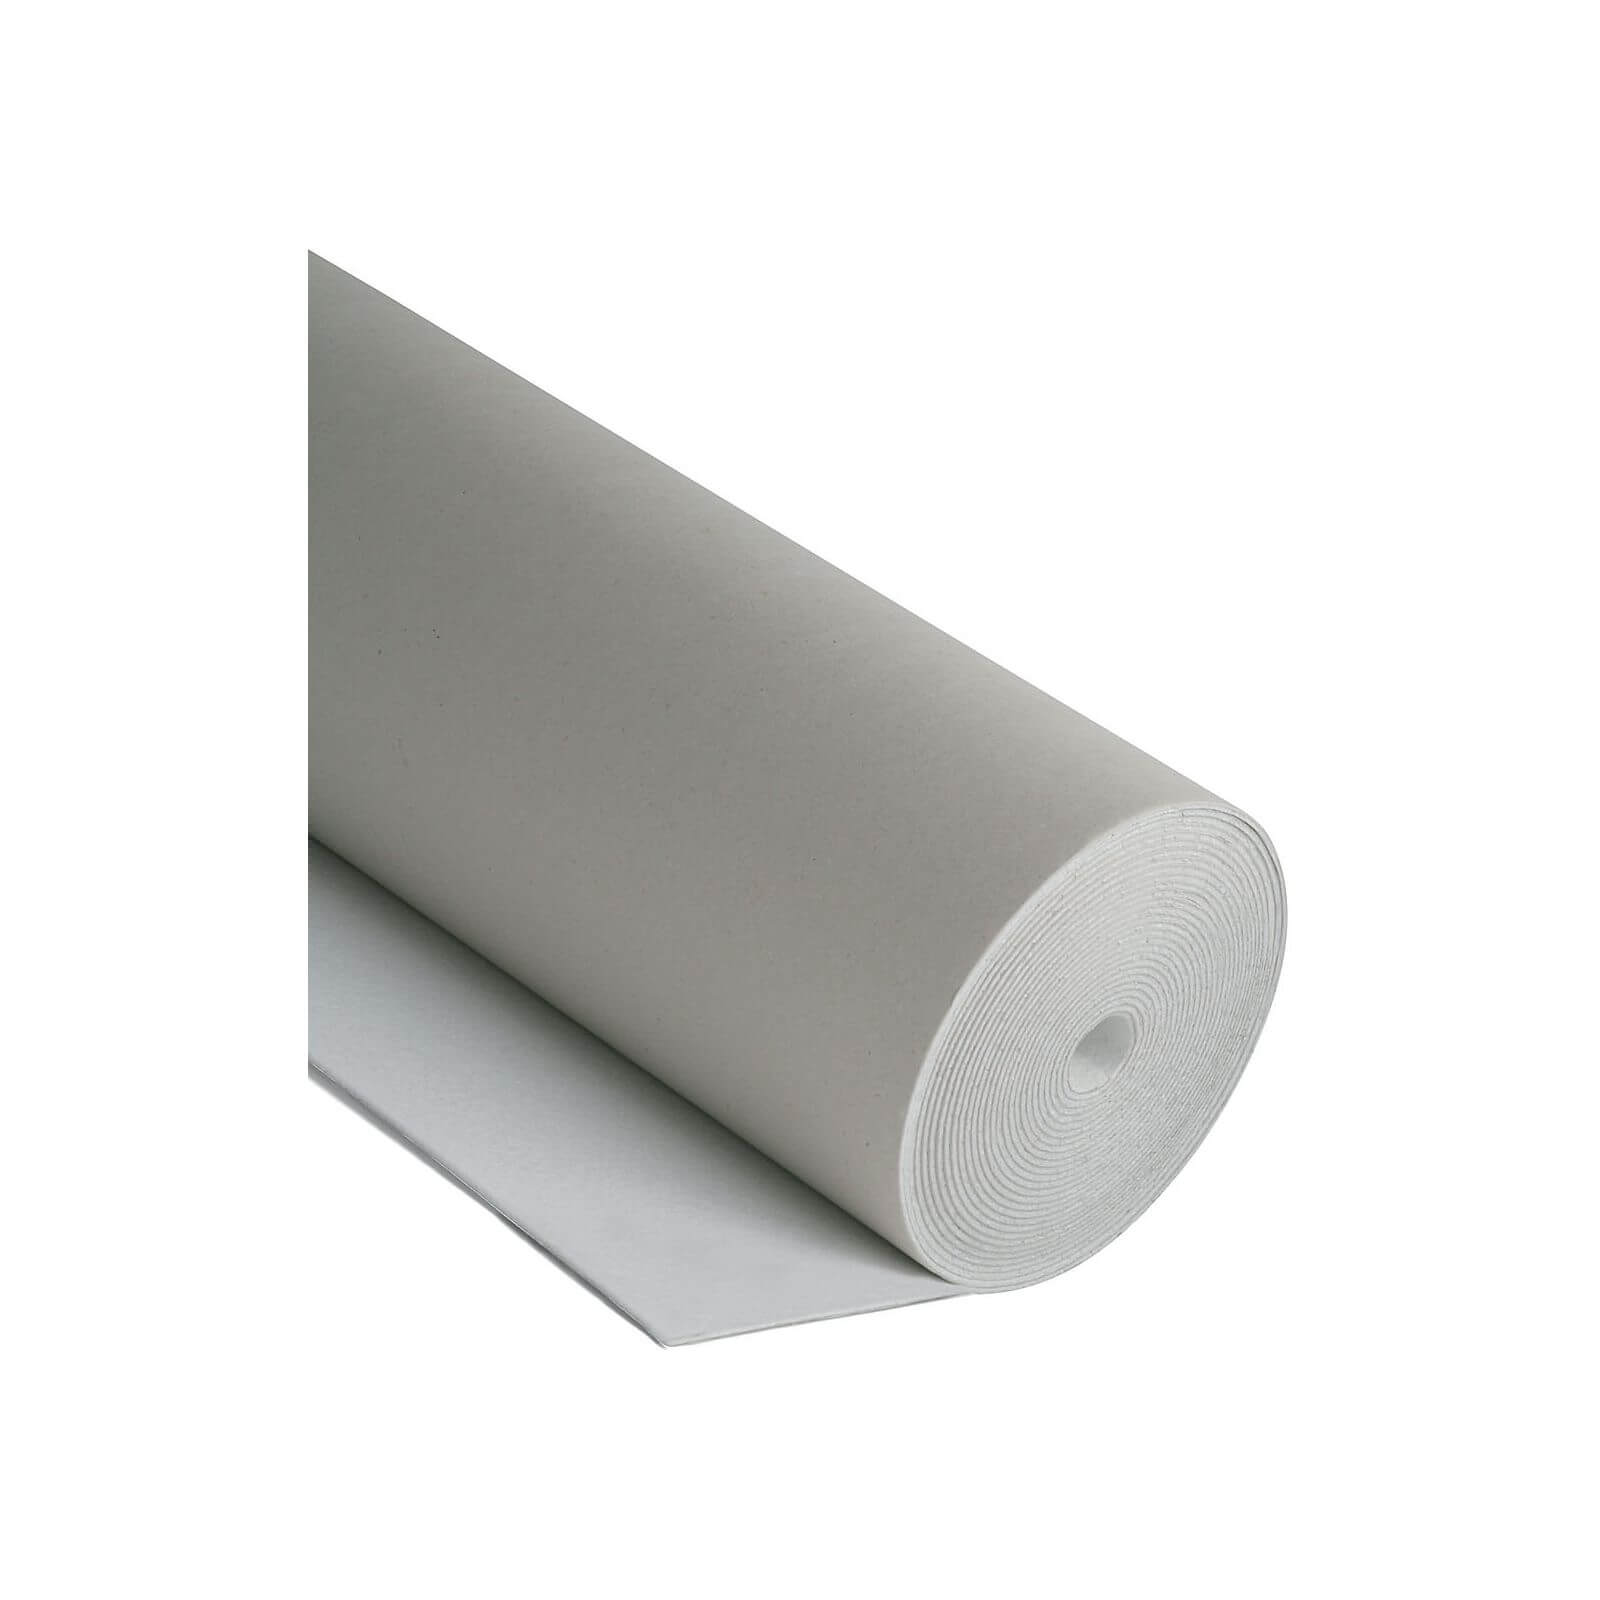 Photo of Nmc Noma Therm Wall Veneer Roll